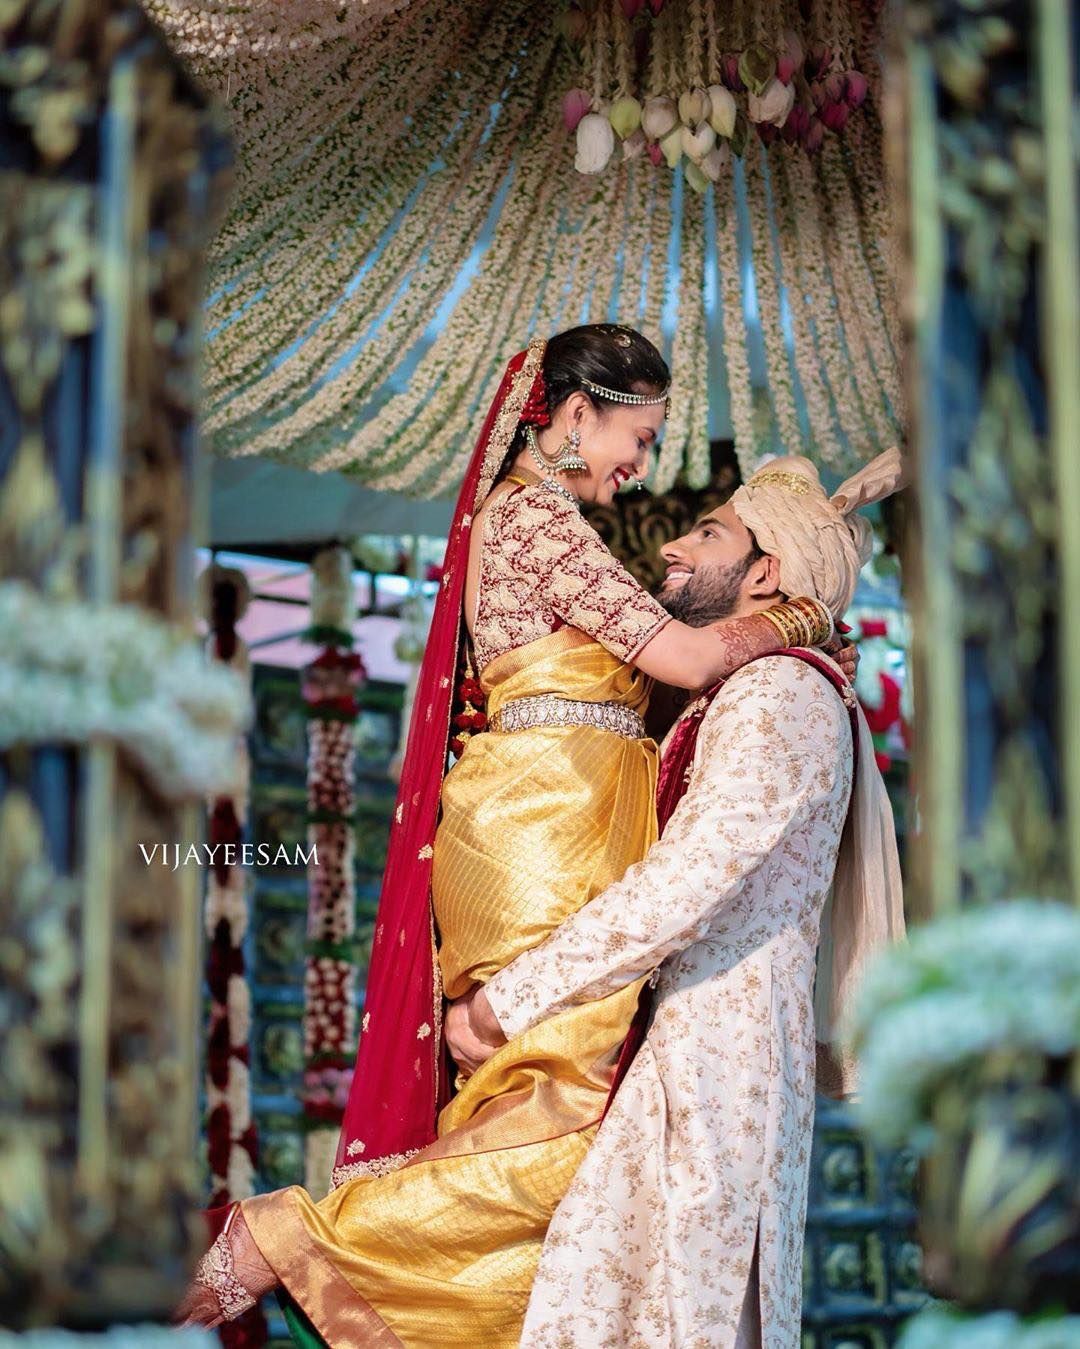 Can T Stop Smiling Looking At These Adorable South Indian Couple Shots